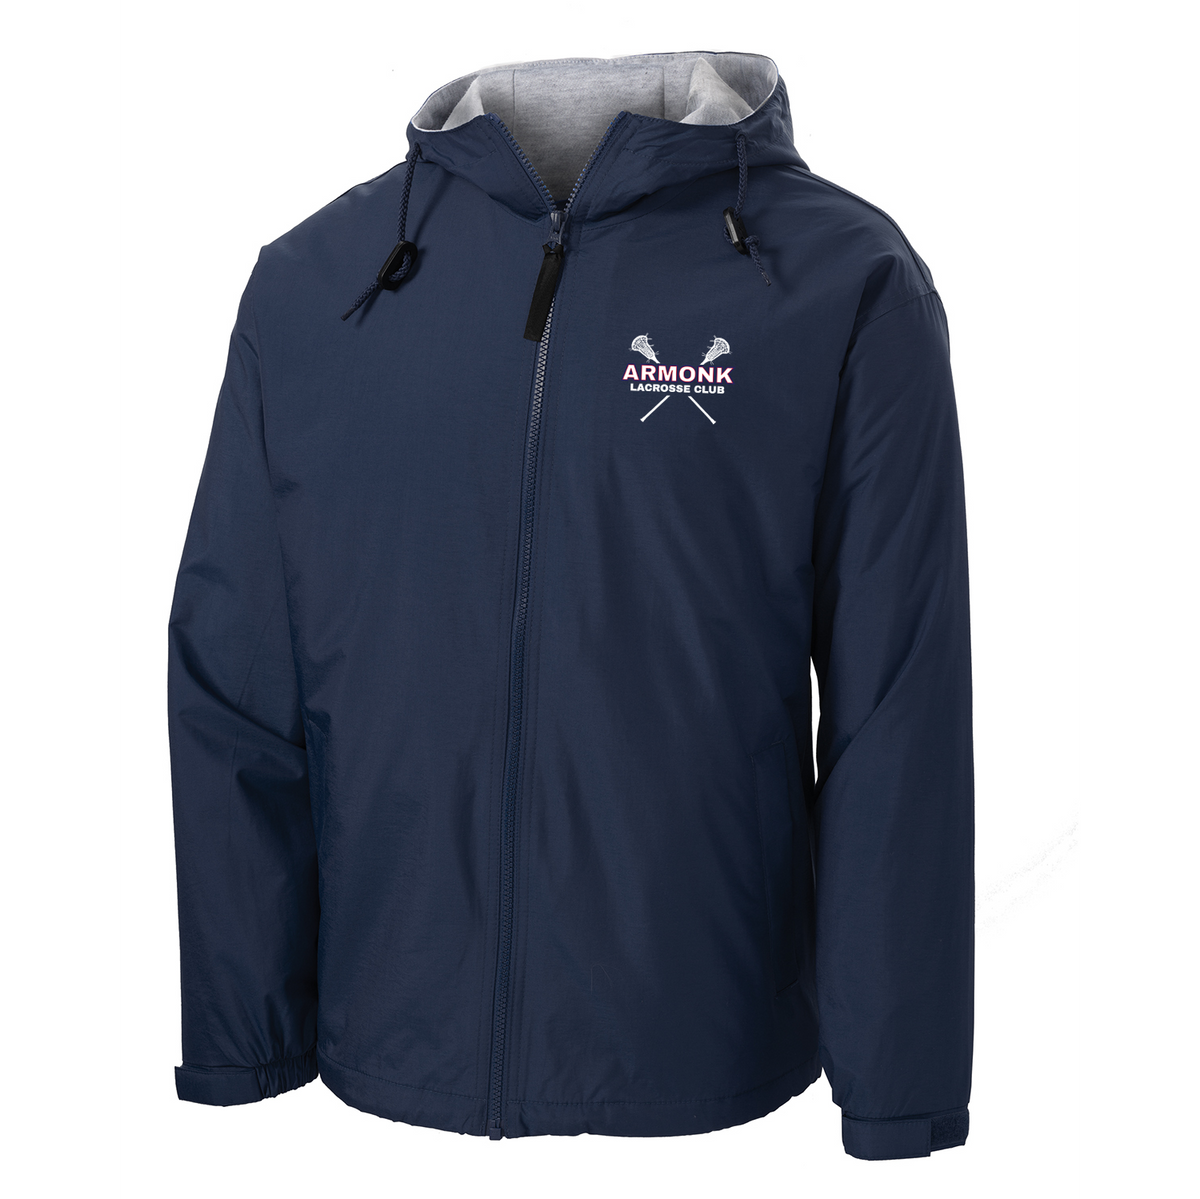 Armonk Lacrosse Club Hooded Jacket (Youth & Adult)